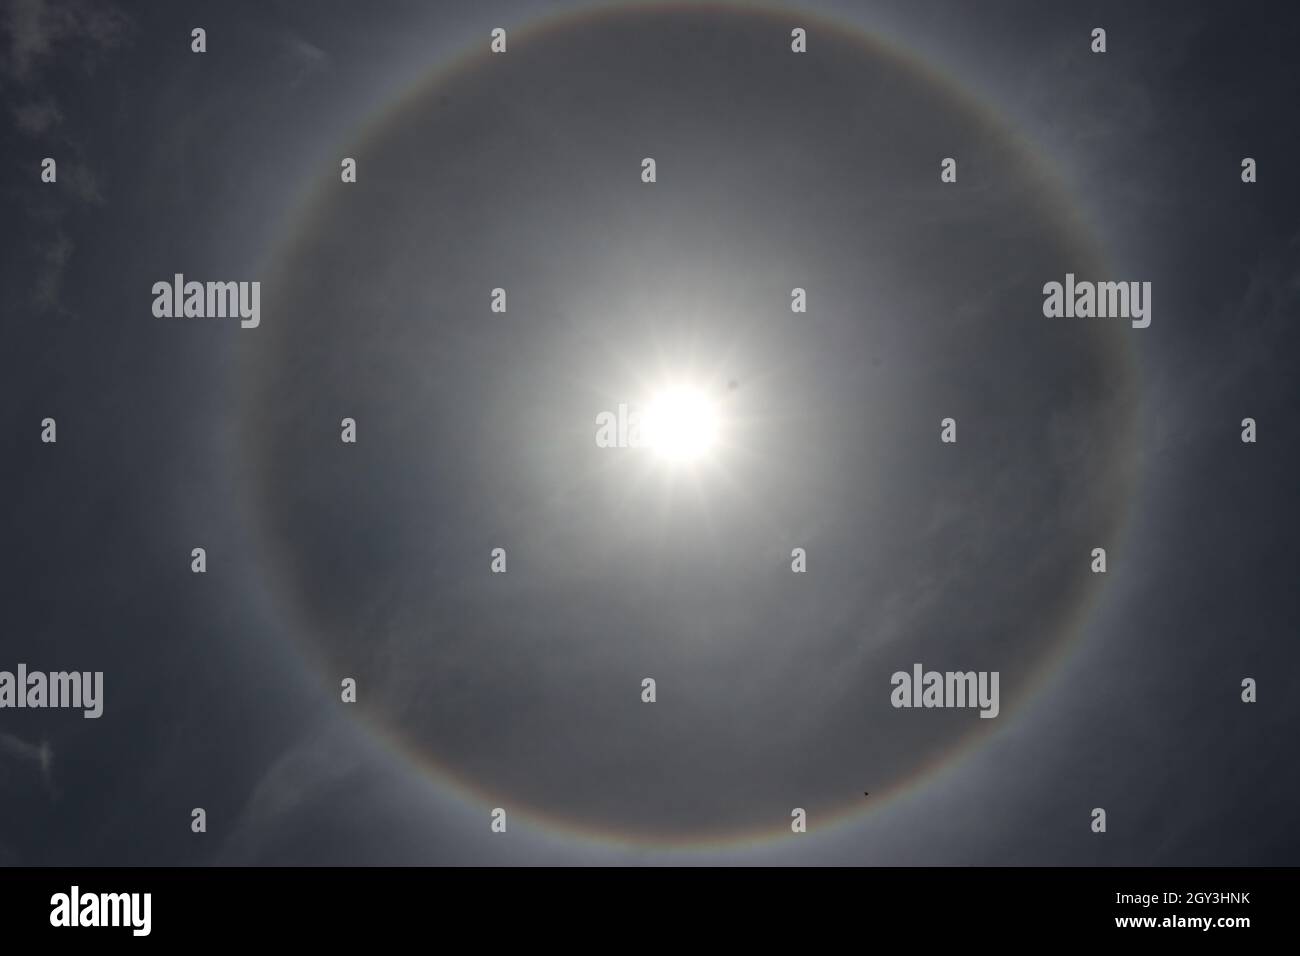 Sun halo or known as solar halo found in India in the noontime with a beautiful rings pattern around the sun Stock Photo